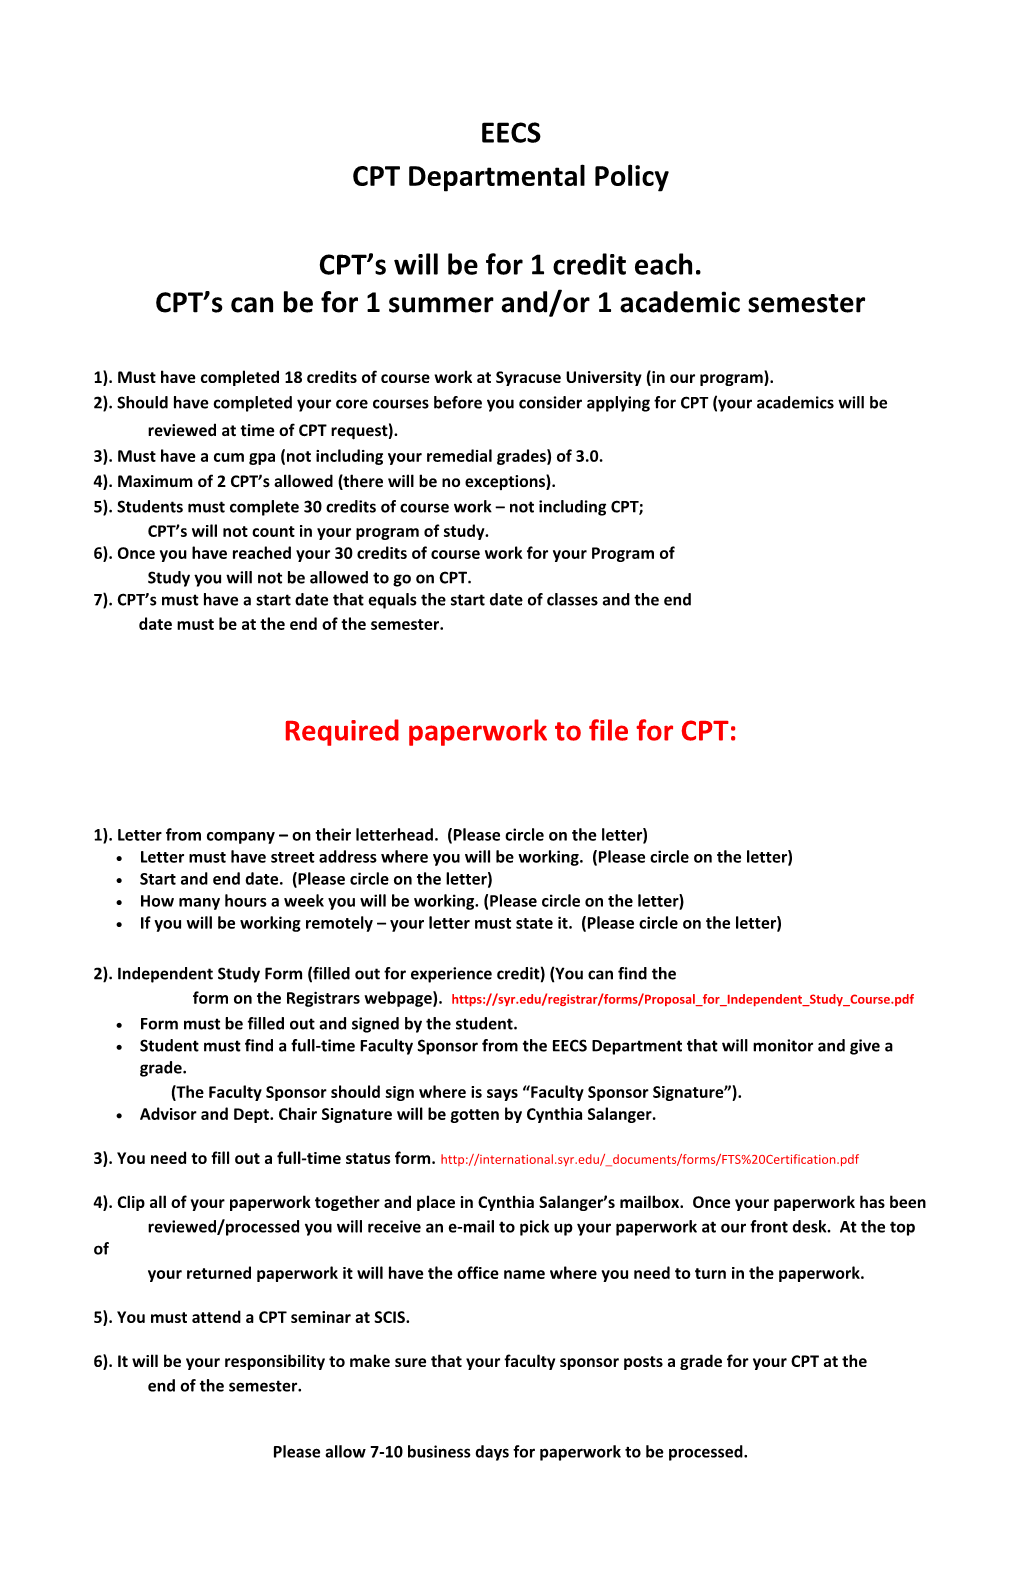 CPT S Can Be for 1 Summer And/Or 1 Academic Semester